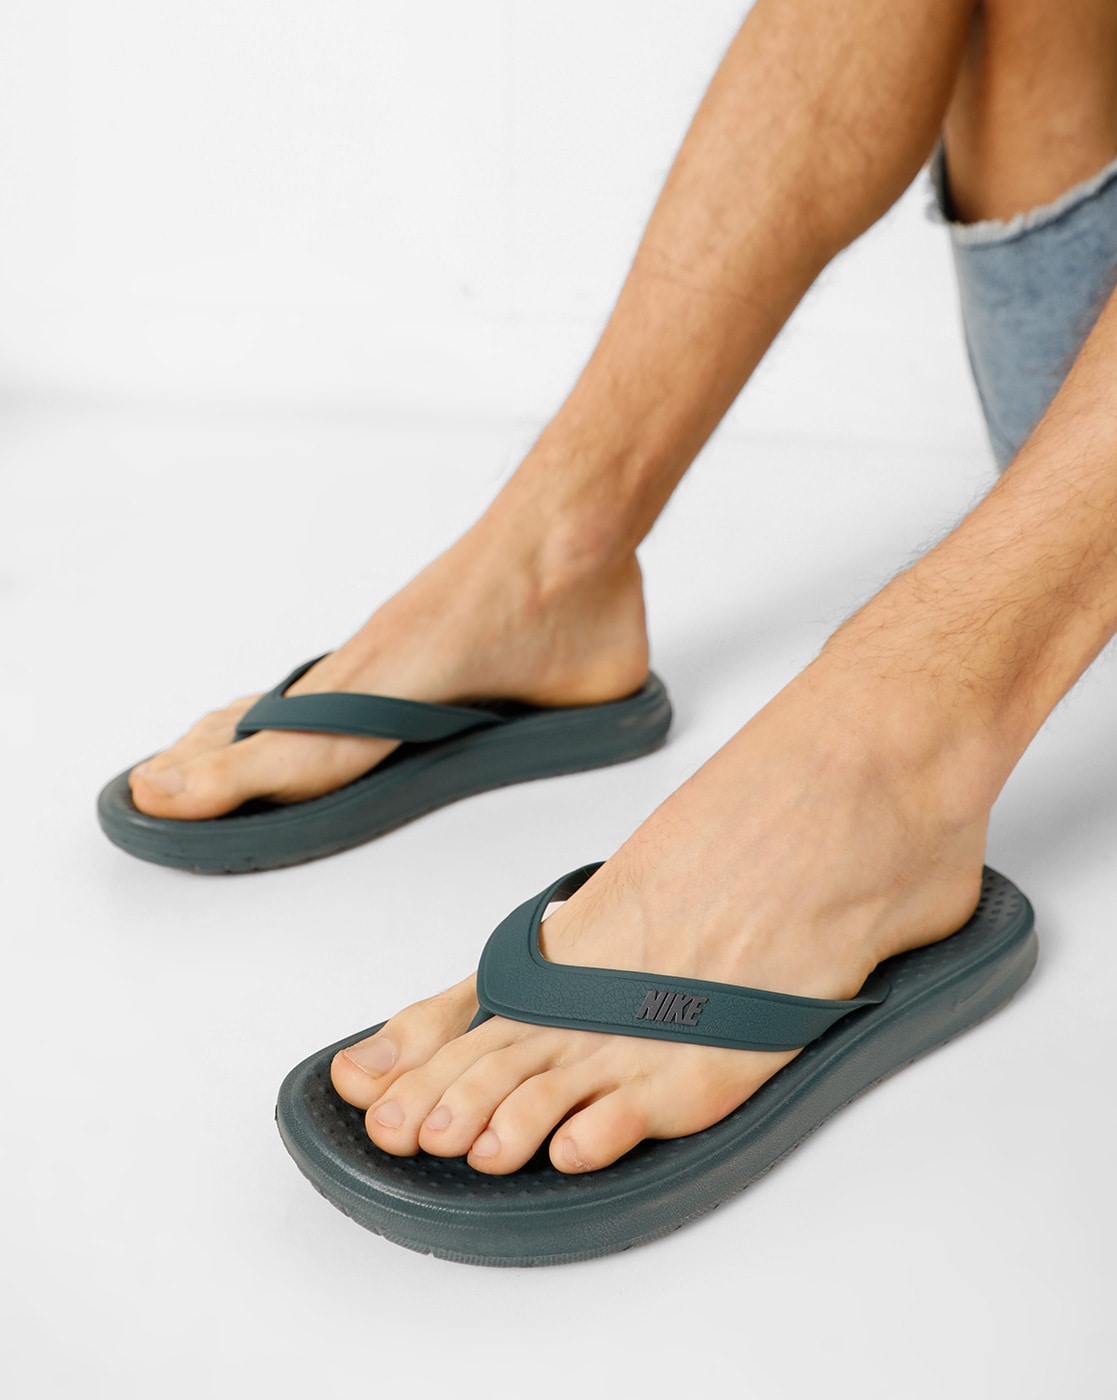 nike solay thong slippers price 